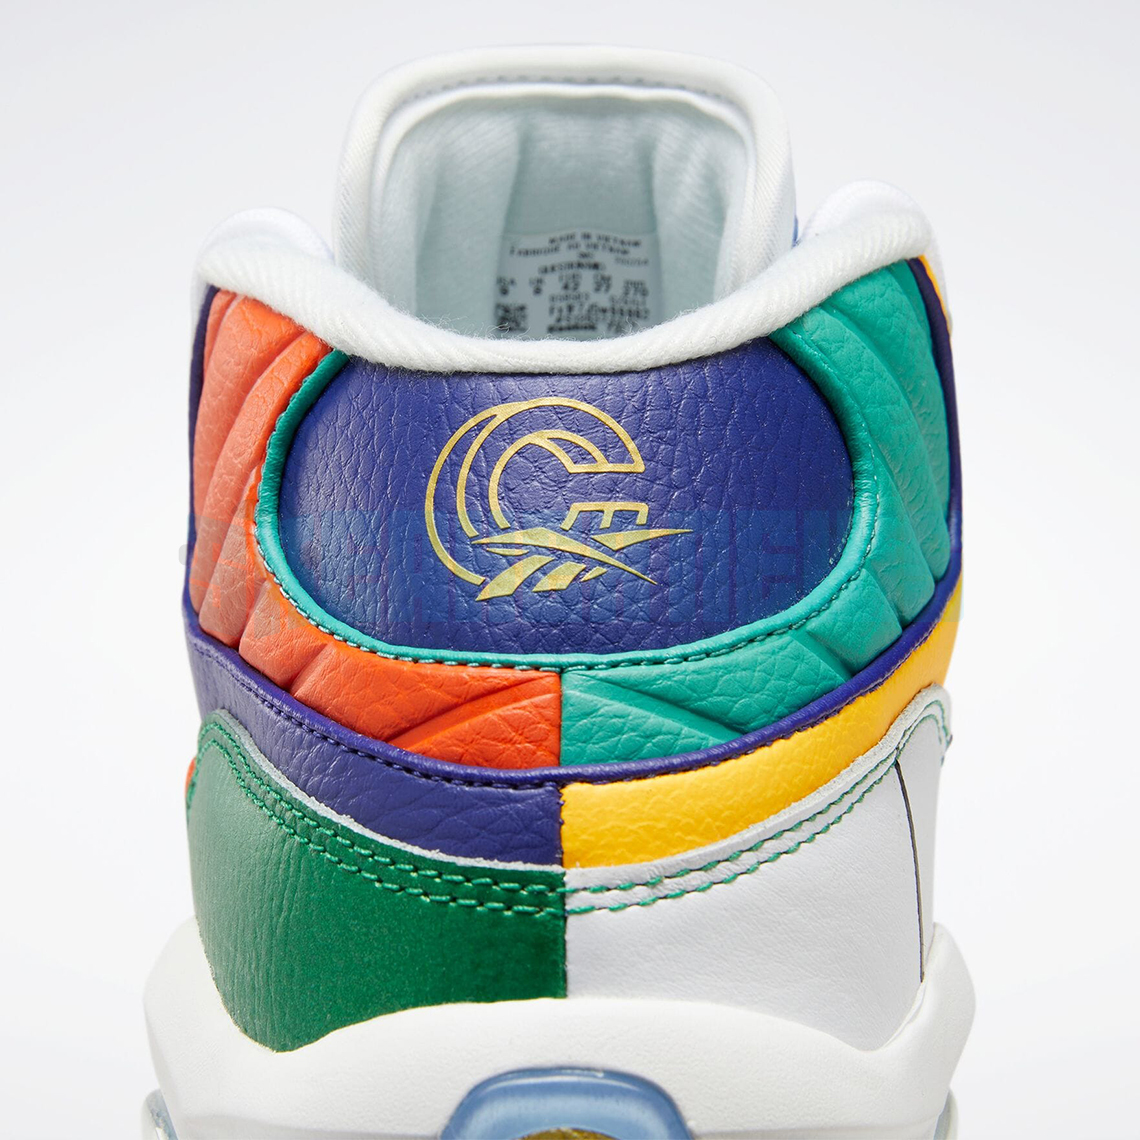 Concepts Reebok gx3521 Question Mid Release Date 7